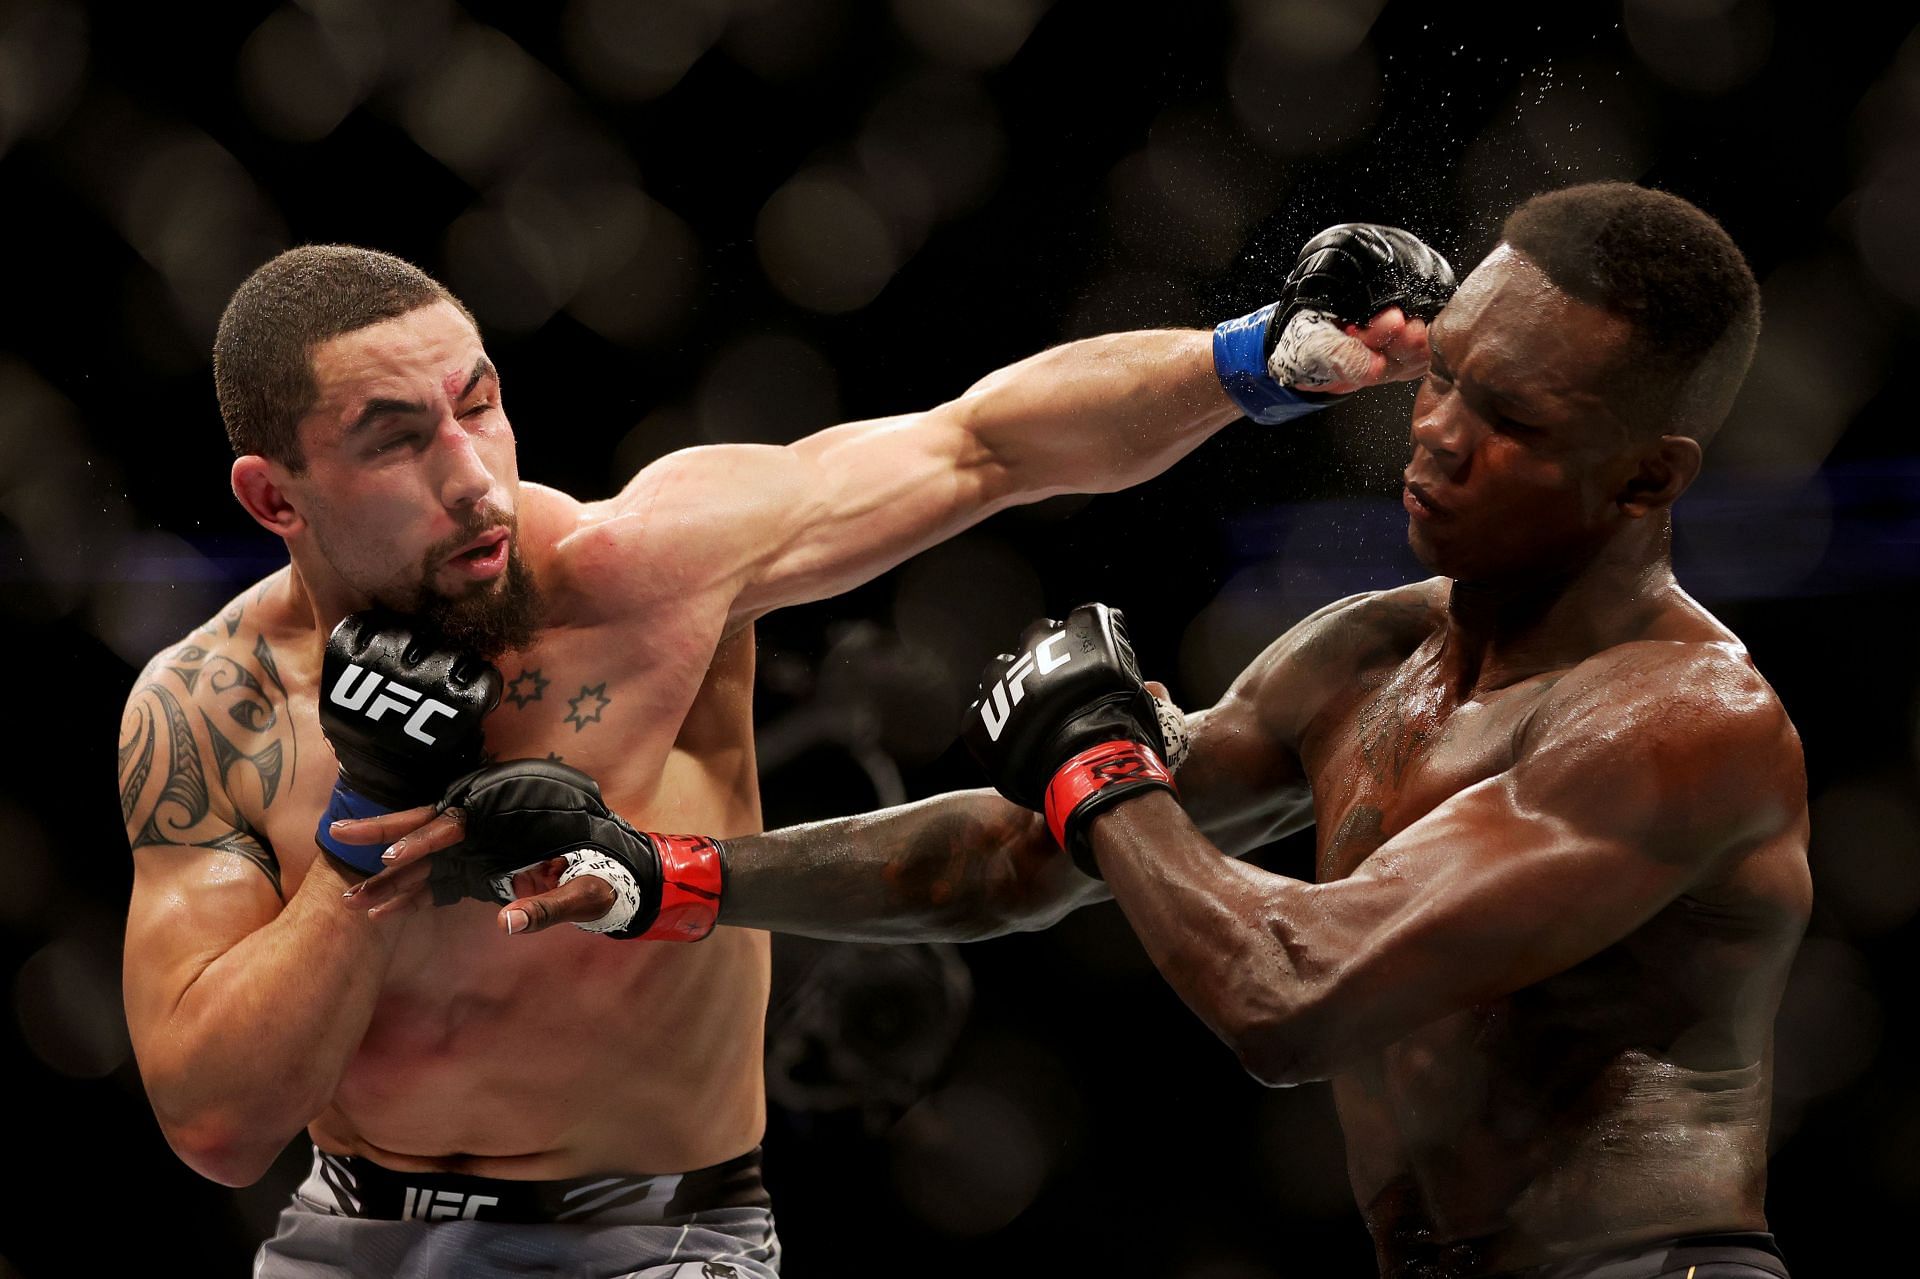 Robert Whittaker has established himself as one of the best middleweights of all time